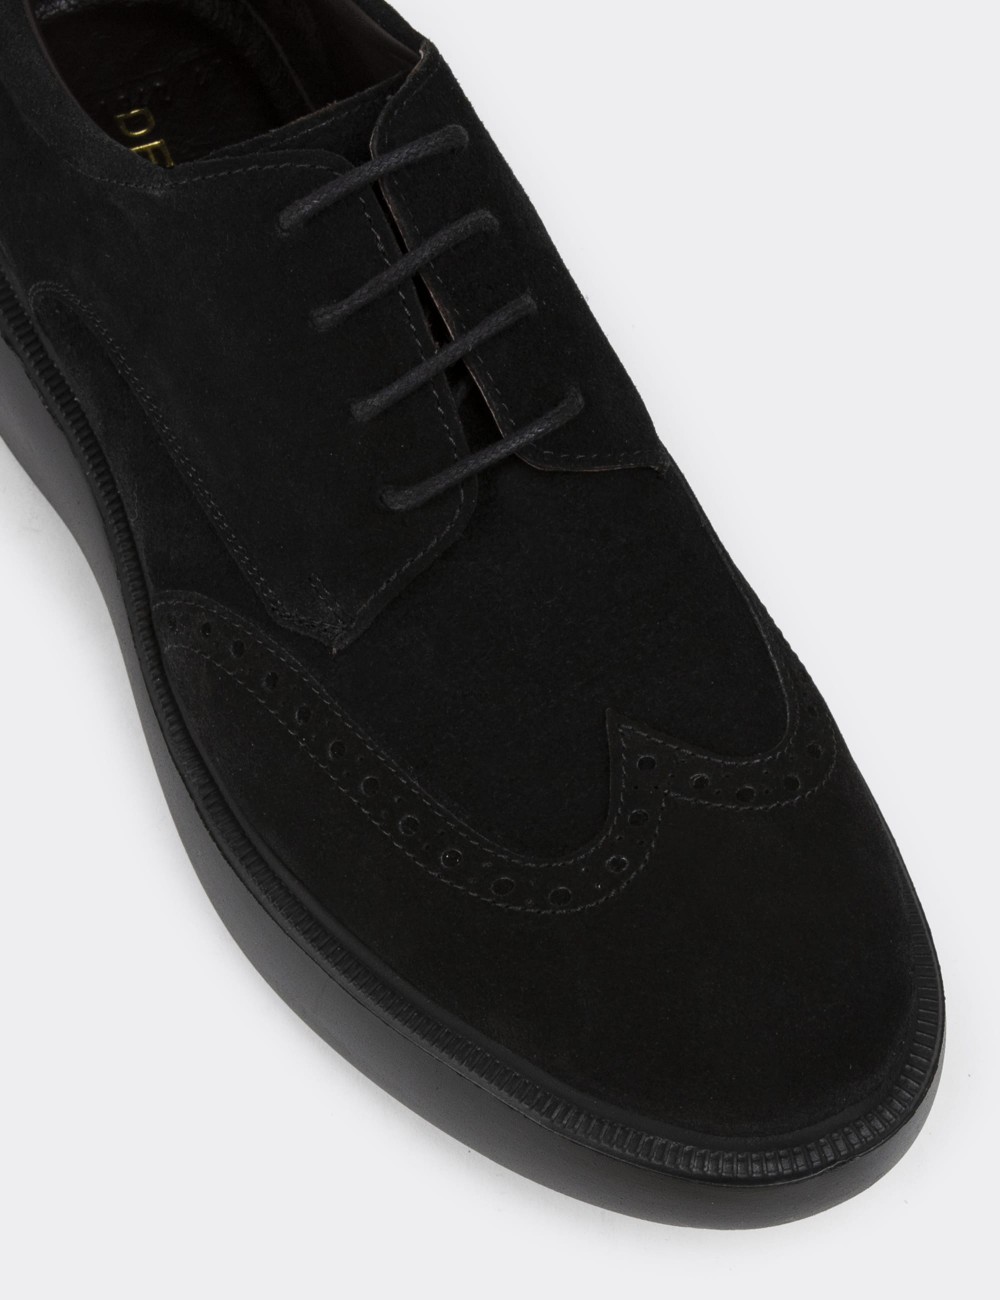 Black Suede Leather Lace-up Shoes - 01942MSYHE02